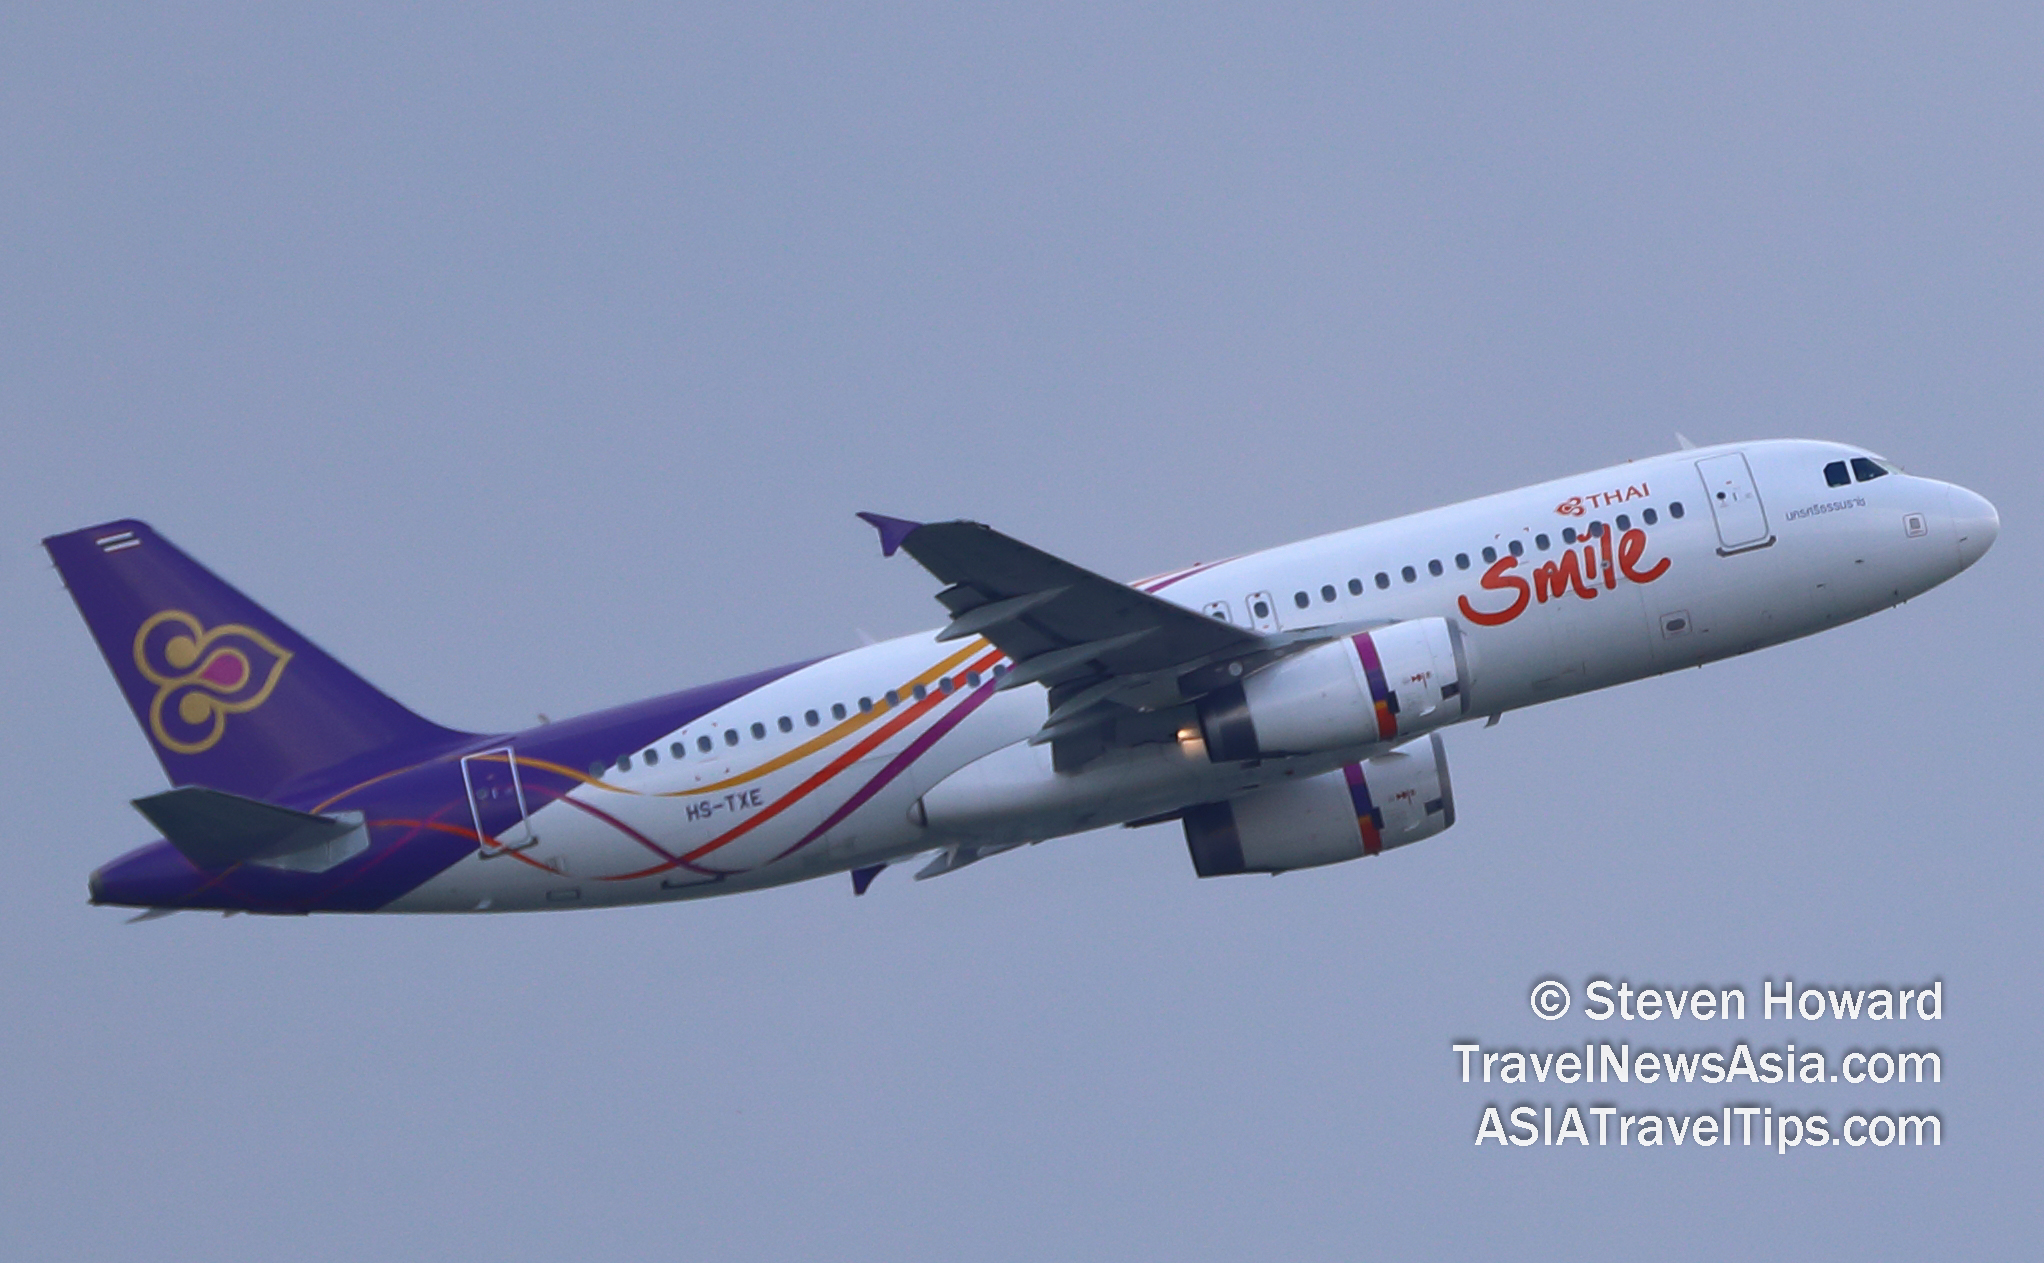 Thai Smile Airbus A320 reg: HS-TXE. Picture by Steven Howard of TravelNewsAsia.com Click to enlarge.